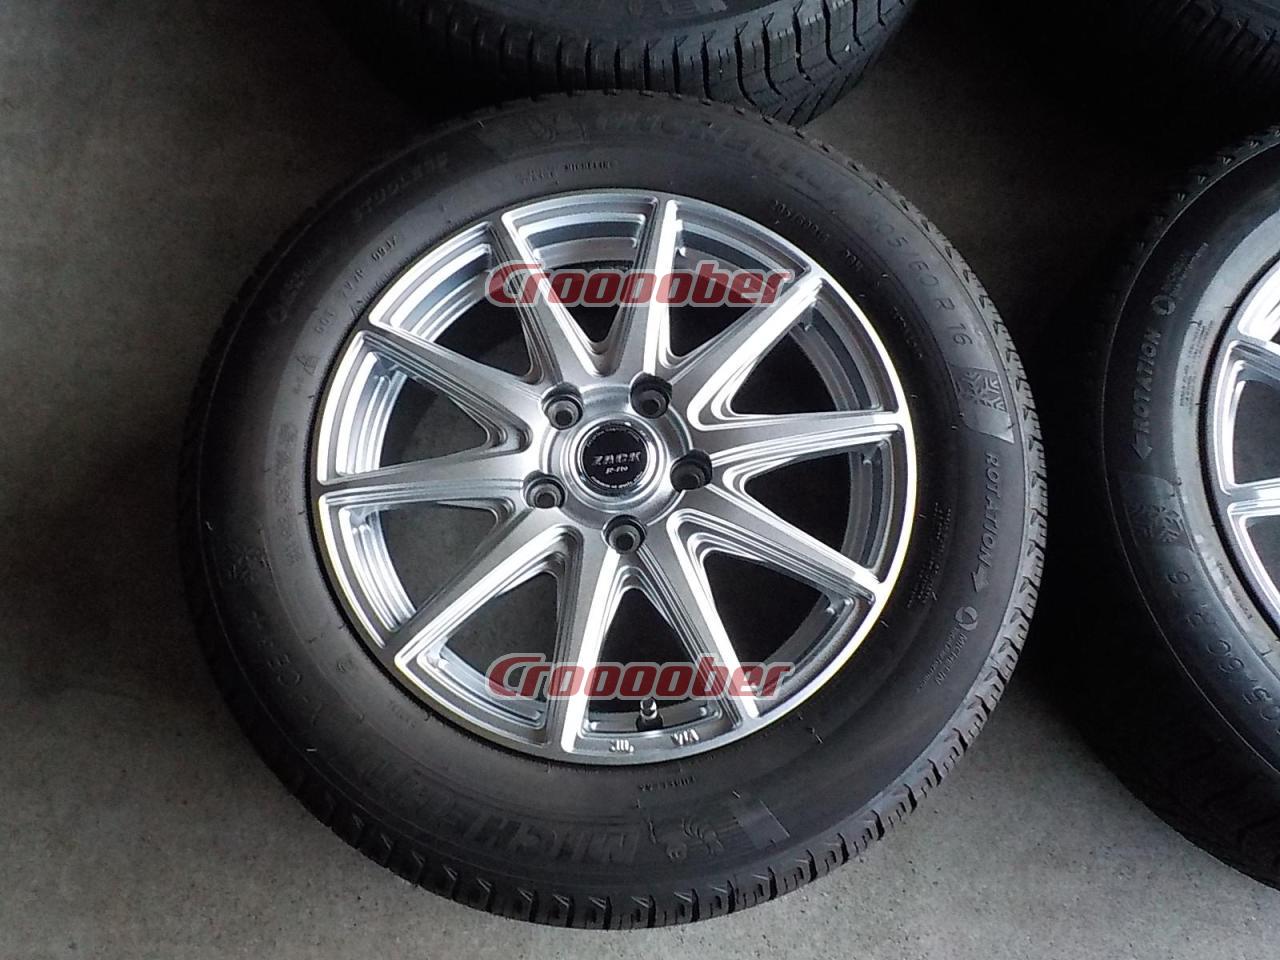 Zack JP-710 + Michelin X-ICE 3+ - 6.5Jx16+53114.3-5H for Sale 